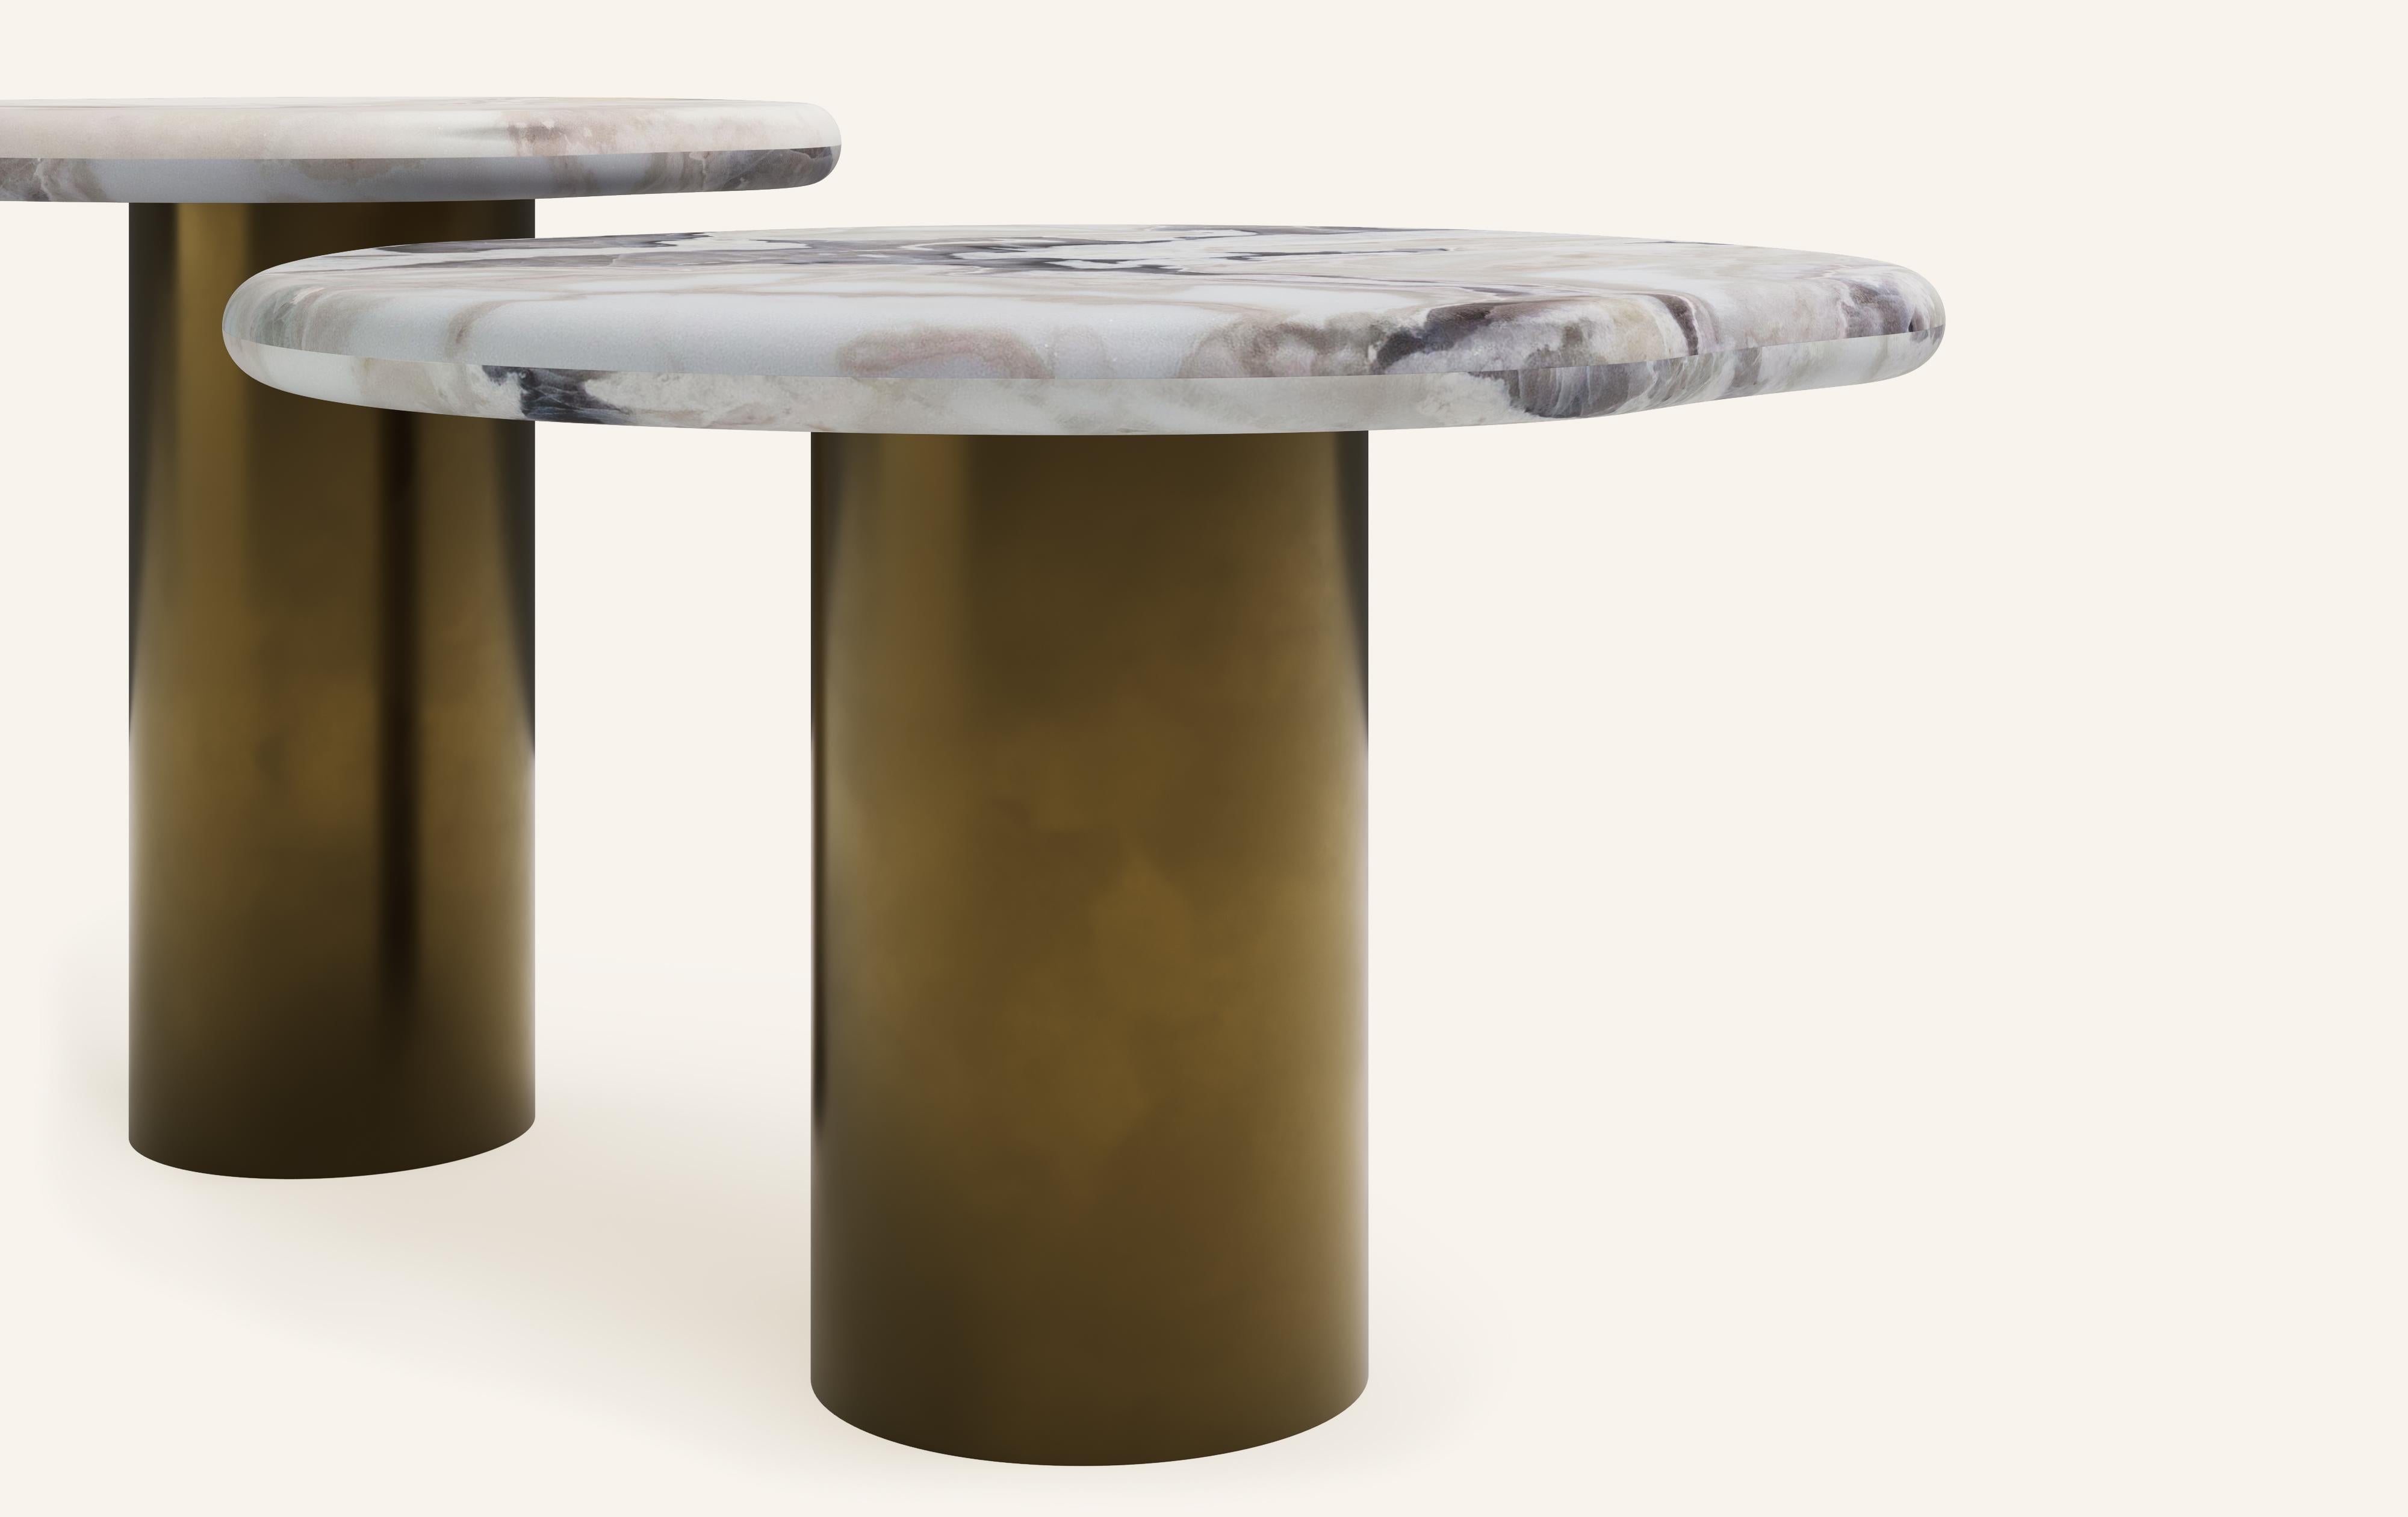 Organic Modern FORM(LA) Lago Round Side Table 24”L x 24”W x 16”H Oyster Marble & Antique Bronze For Sale